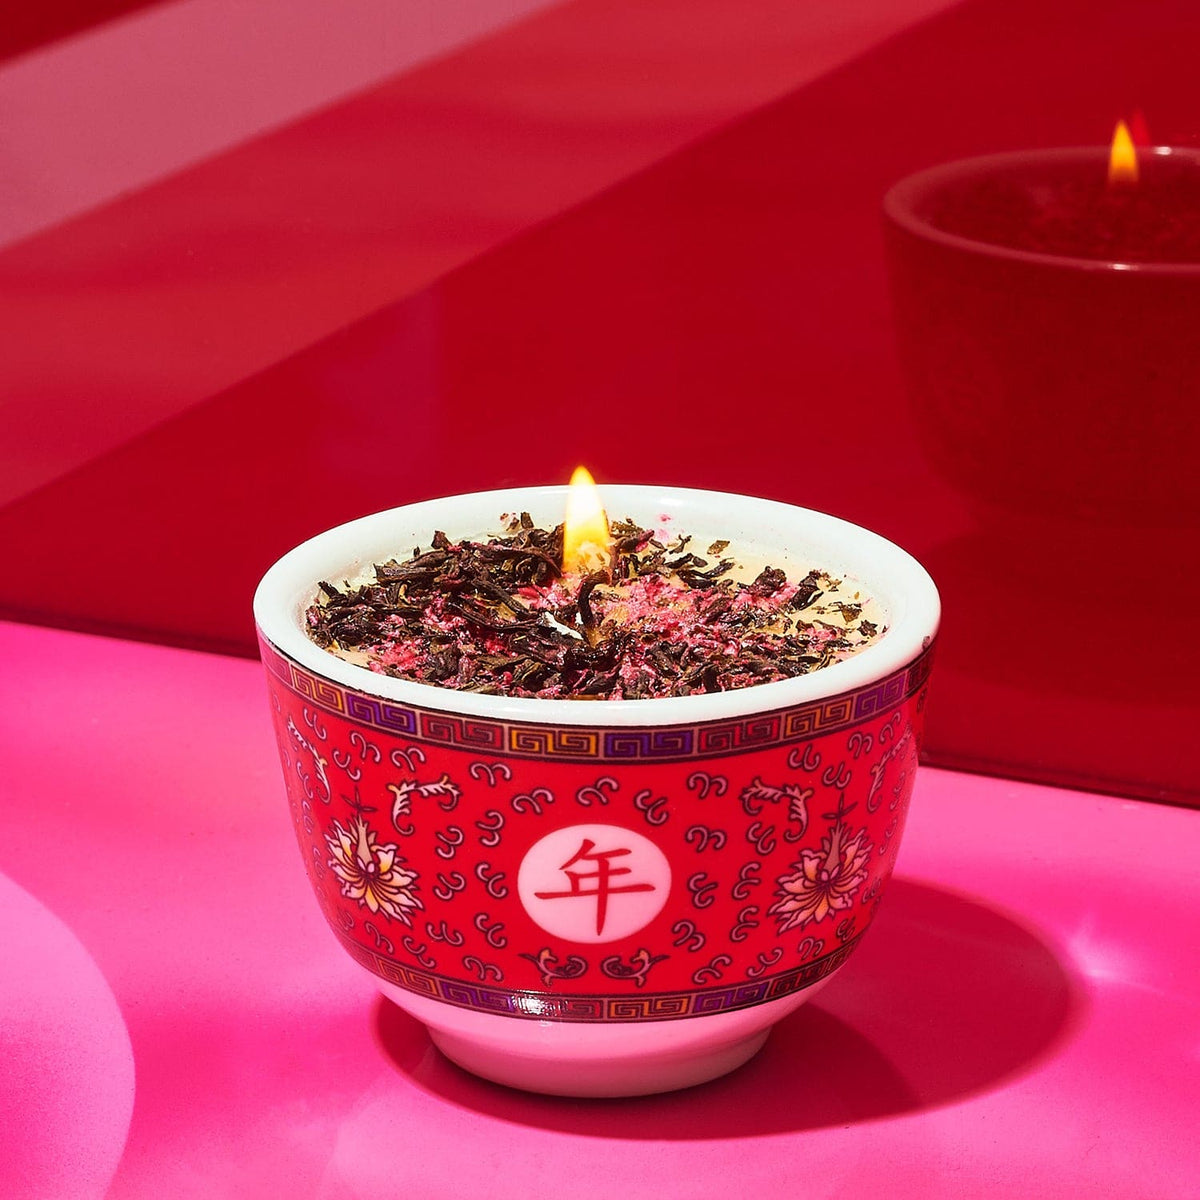 Tea Cup Candle Candle - Xstephoct23